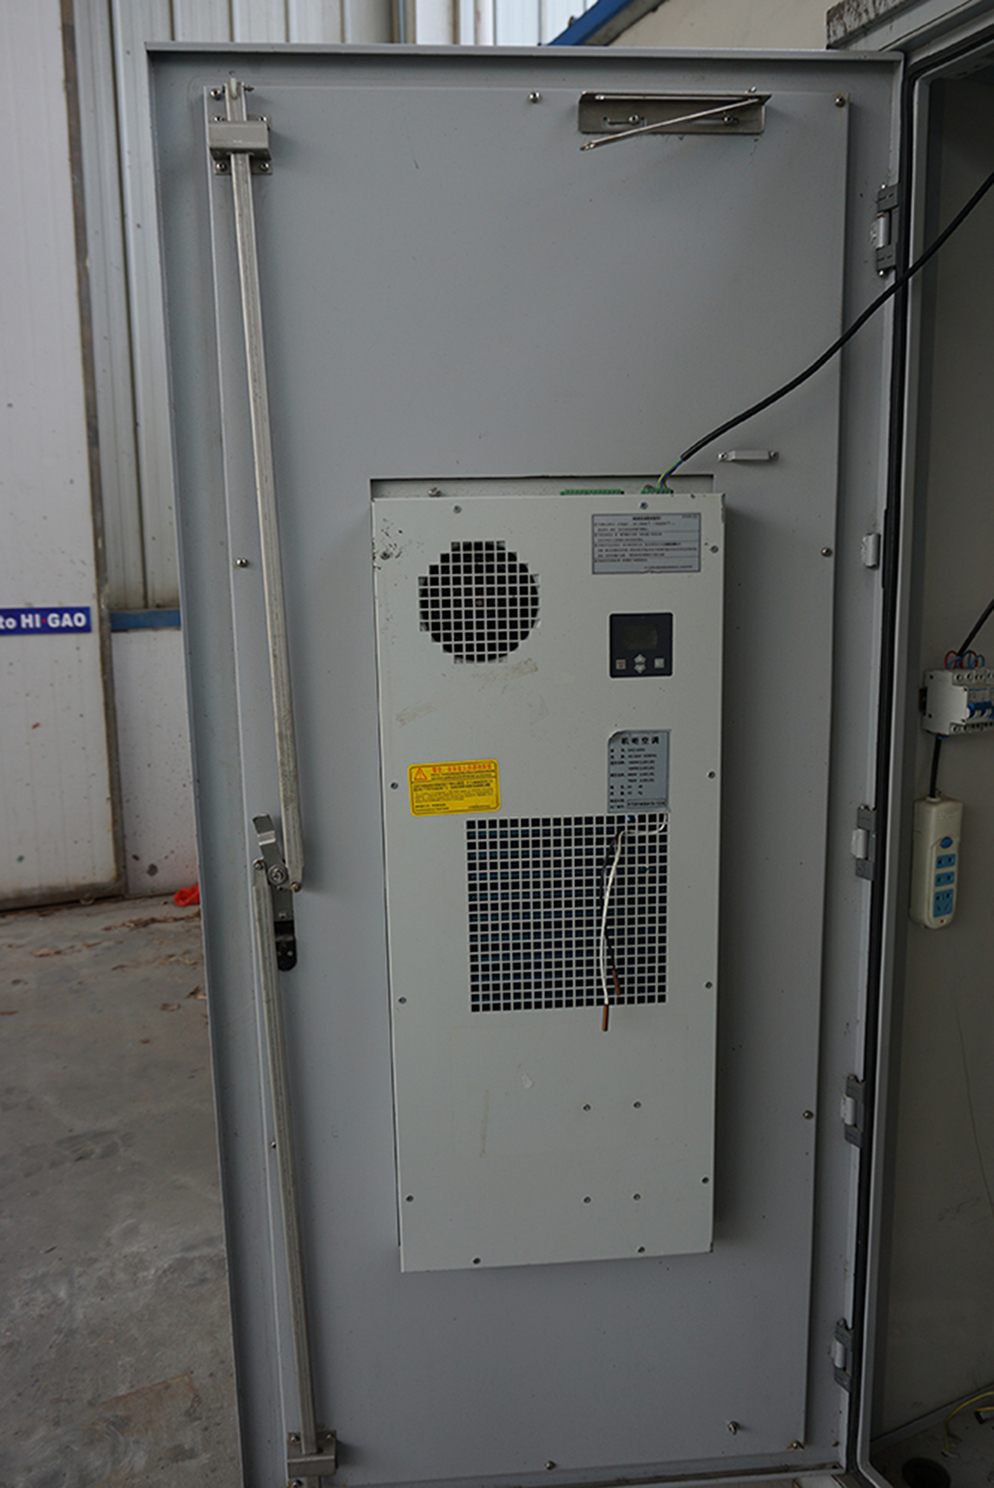 Mclean Industrial Electrical Cabinet Air Conditioner